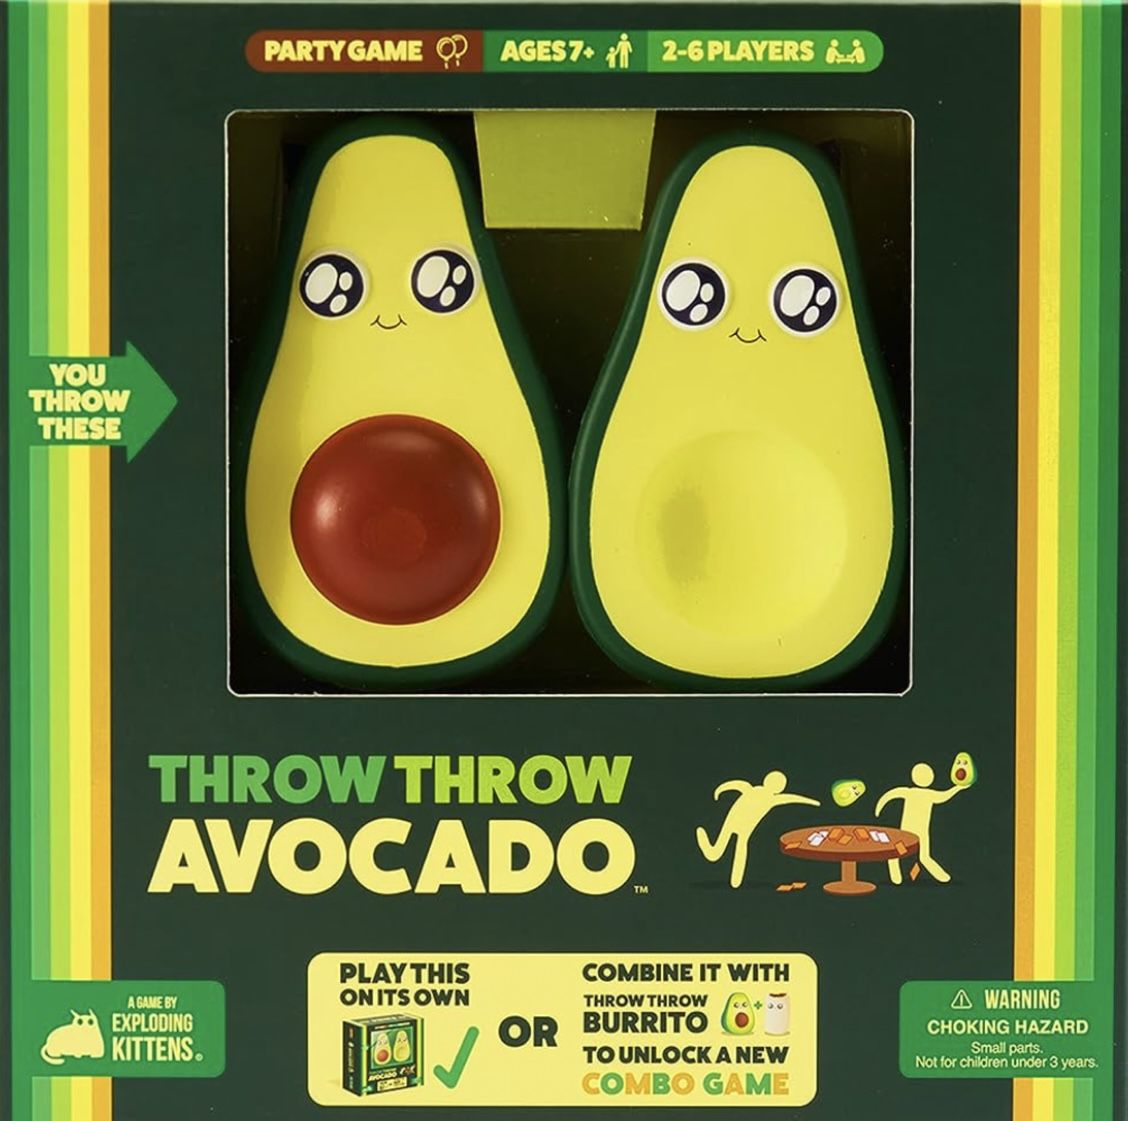 Throw Avocado by Exploding Kittens - A Dodgeball Card Sequel and Expansion Set